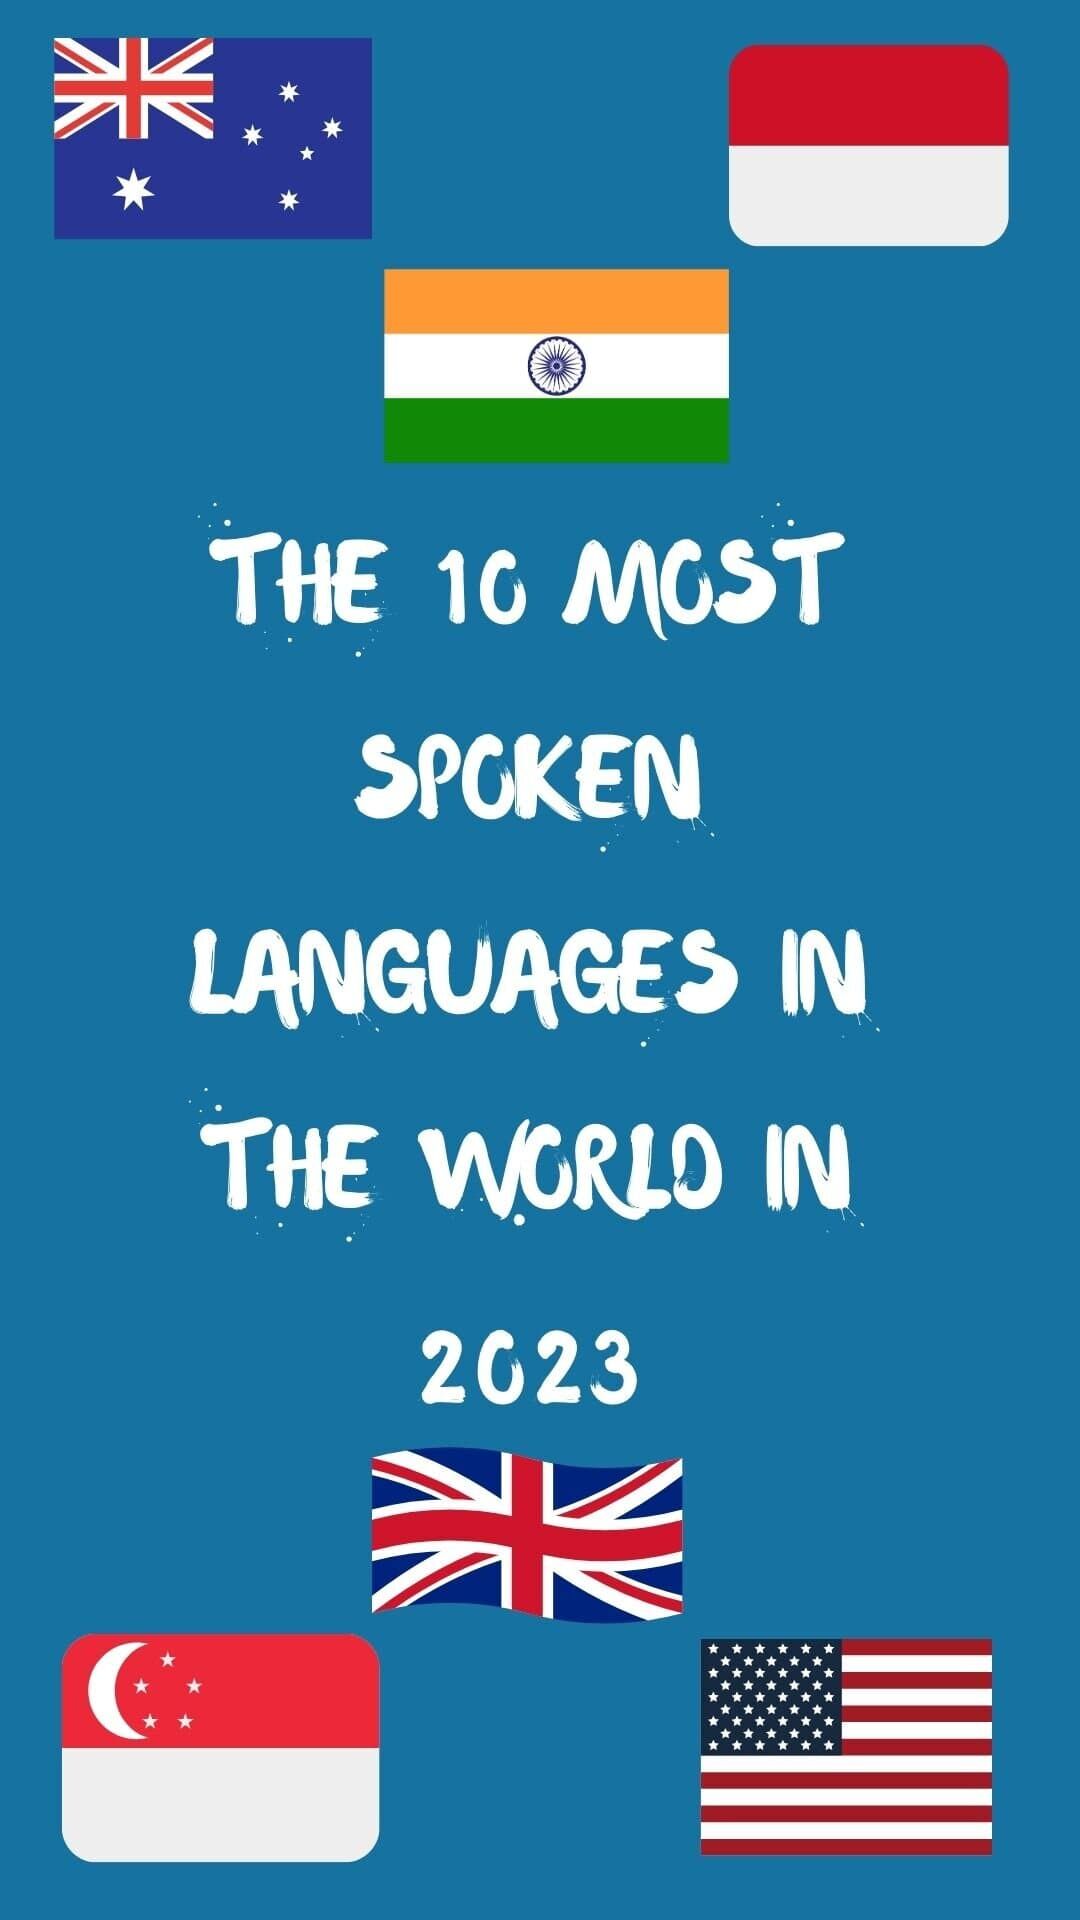 281617 01 The 10 Most Spoken Languages In The World In 2023 1 